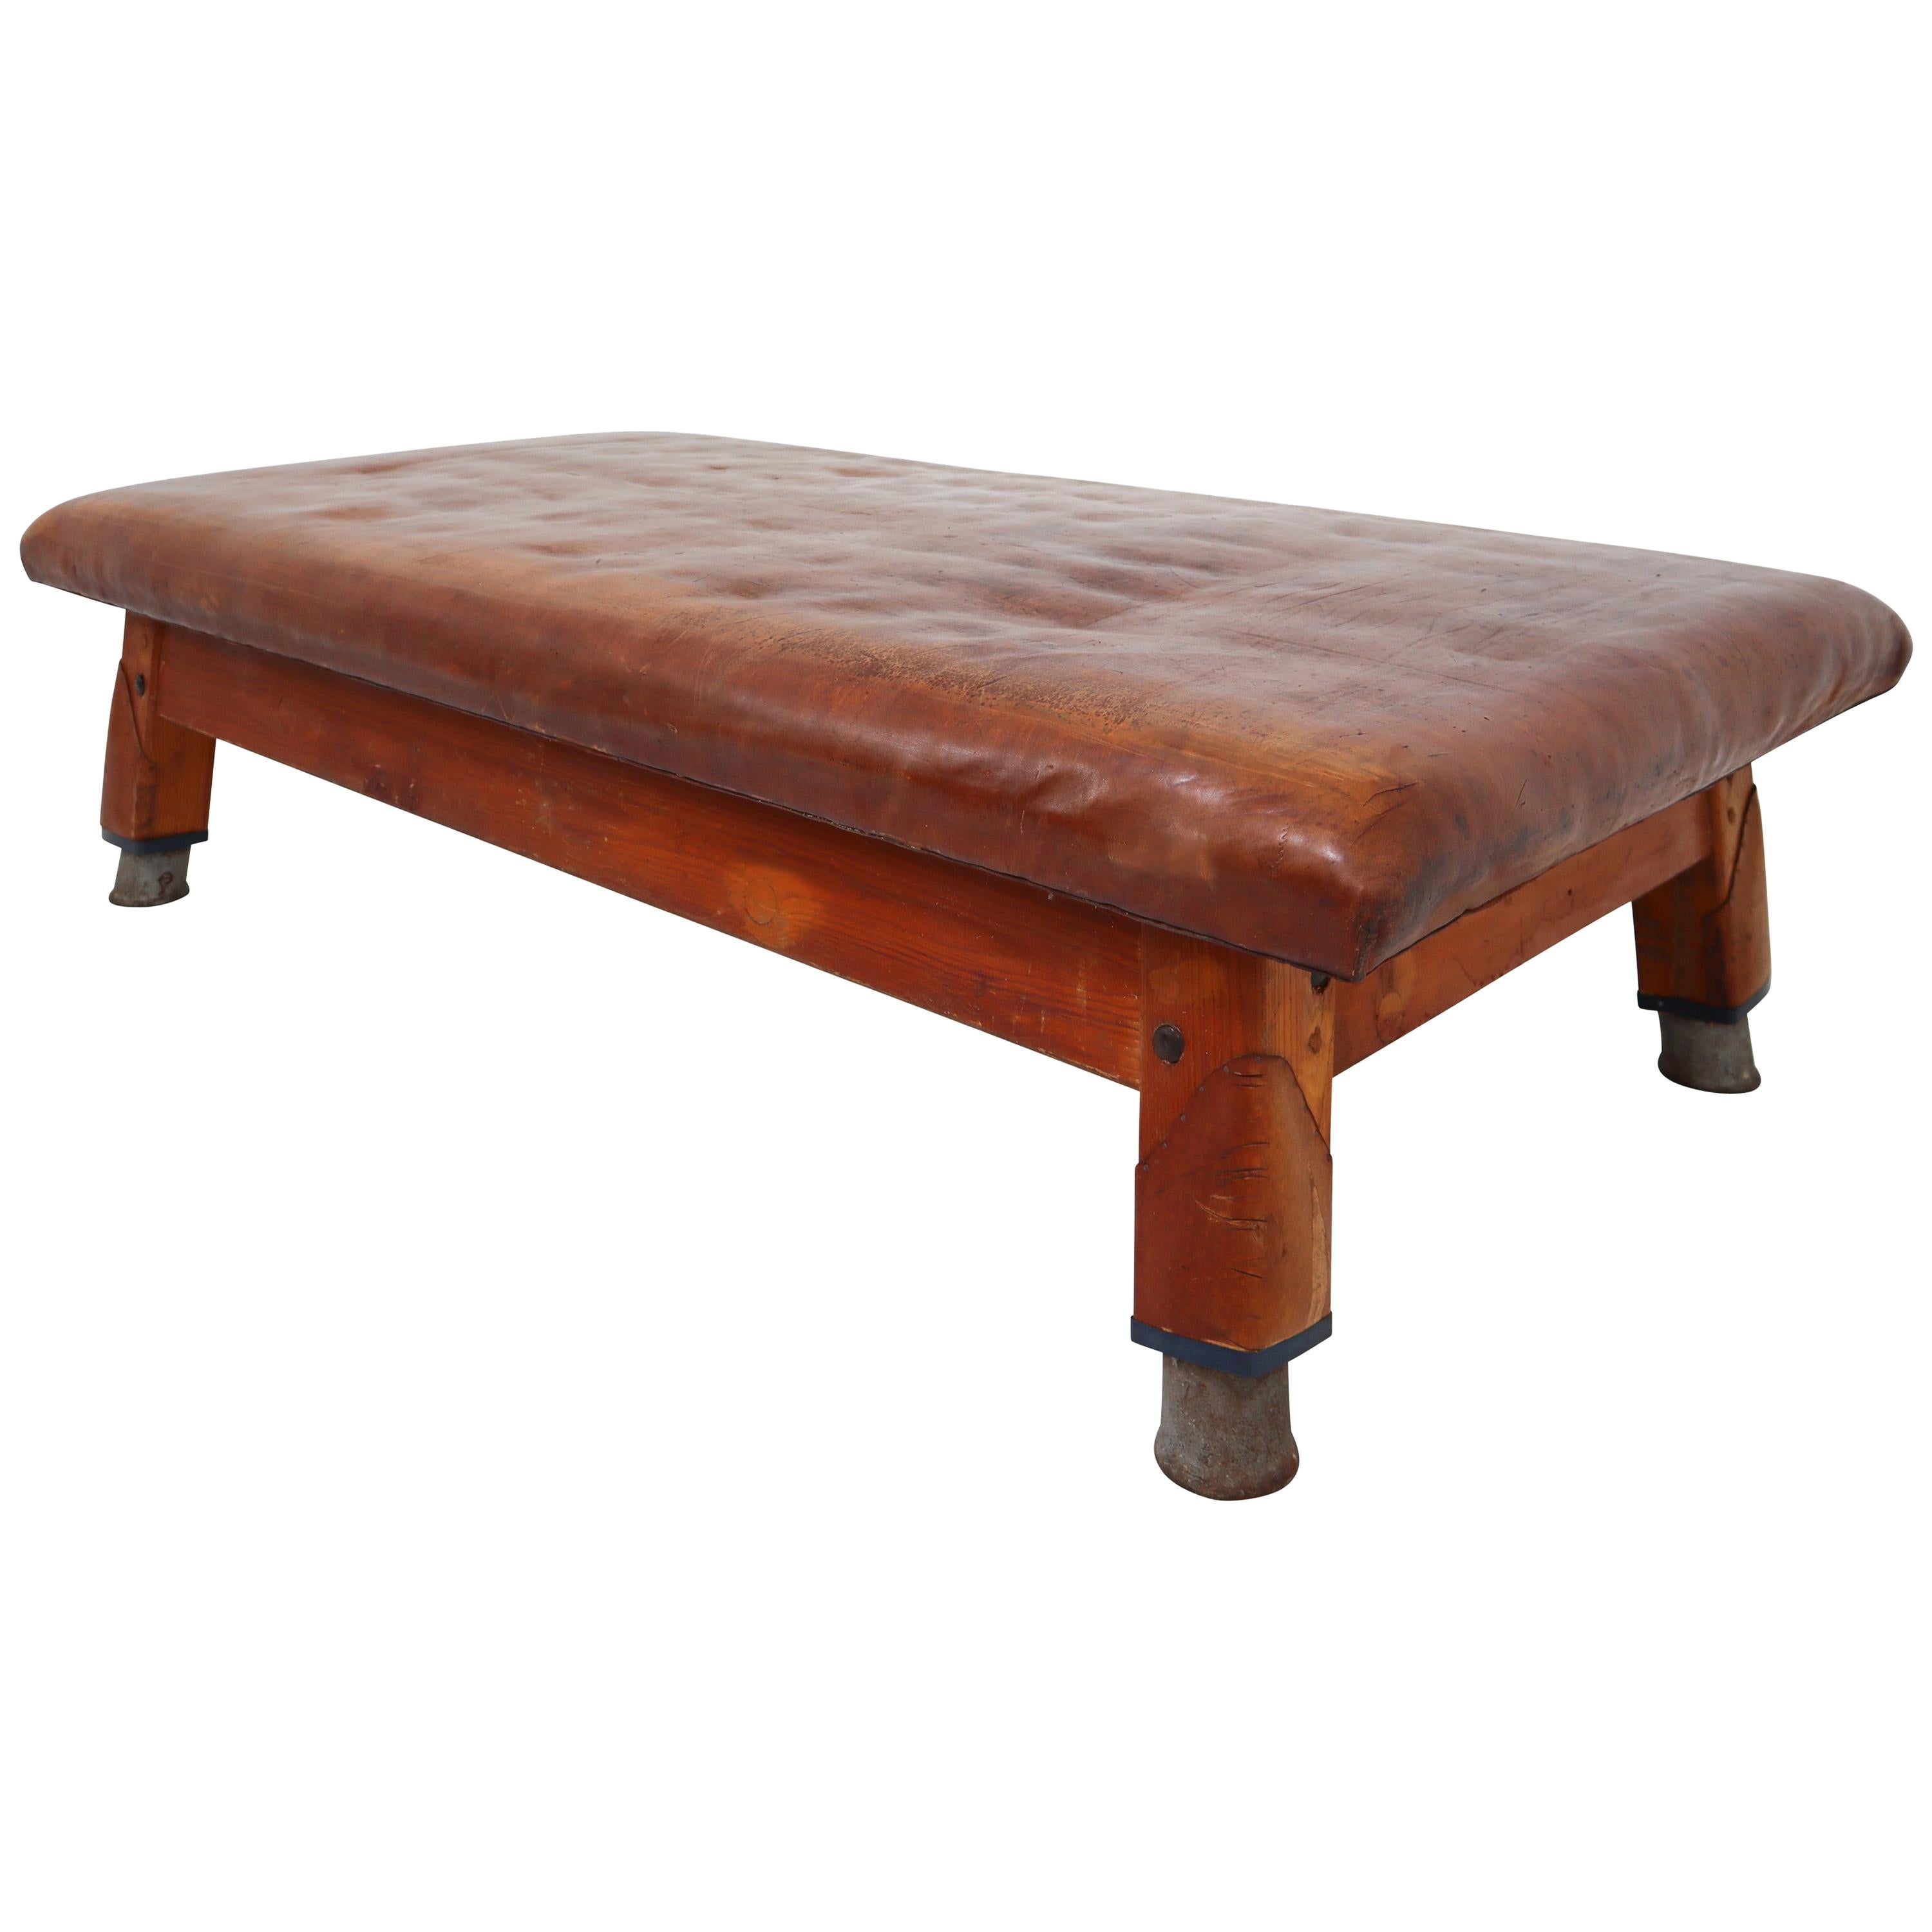 Vintage Patinated Leather Gym Bench or Table, circa 1940